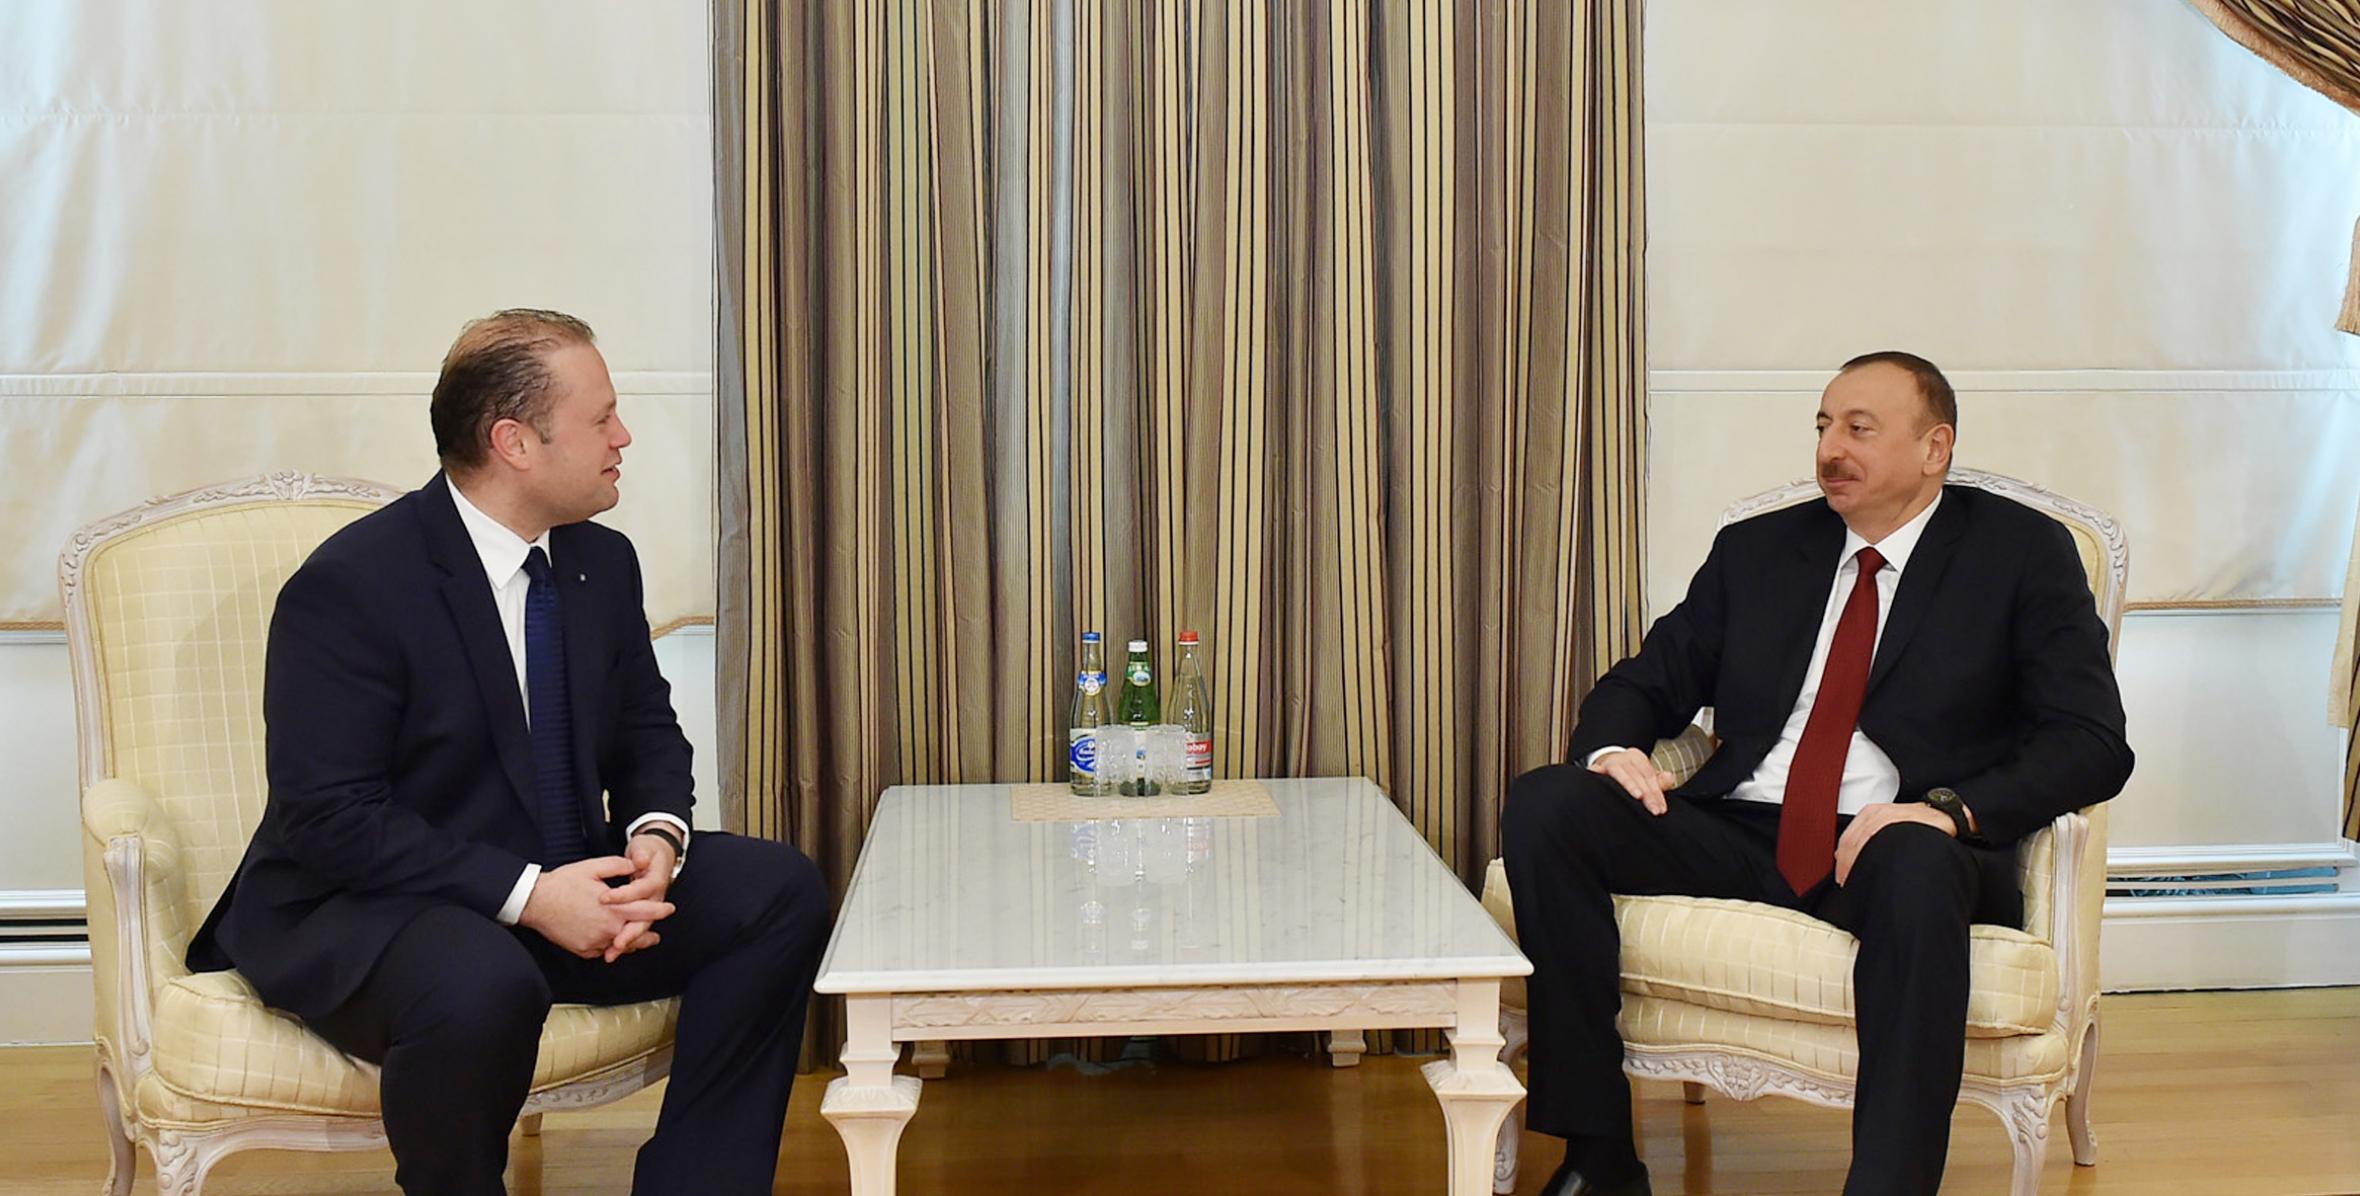 Ilham Aliyev received the Prime Minister of Malta